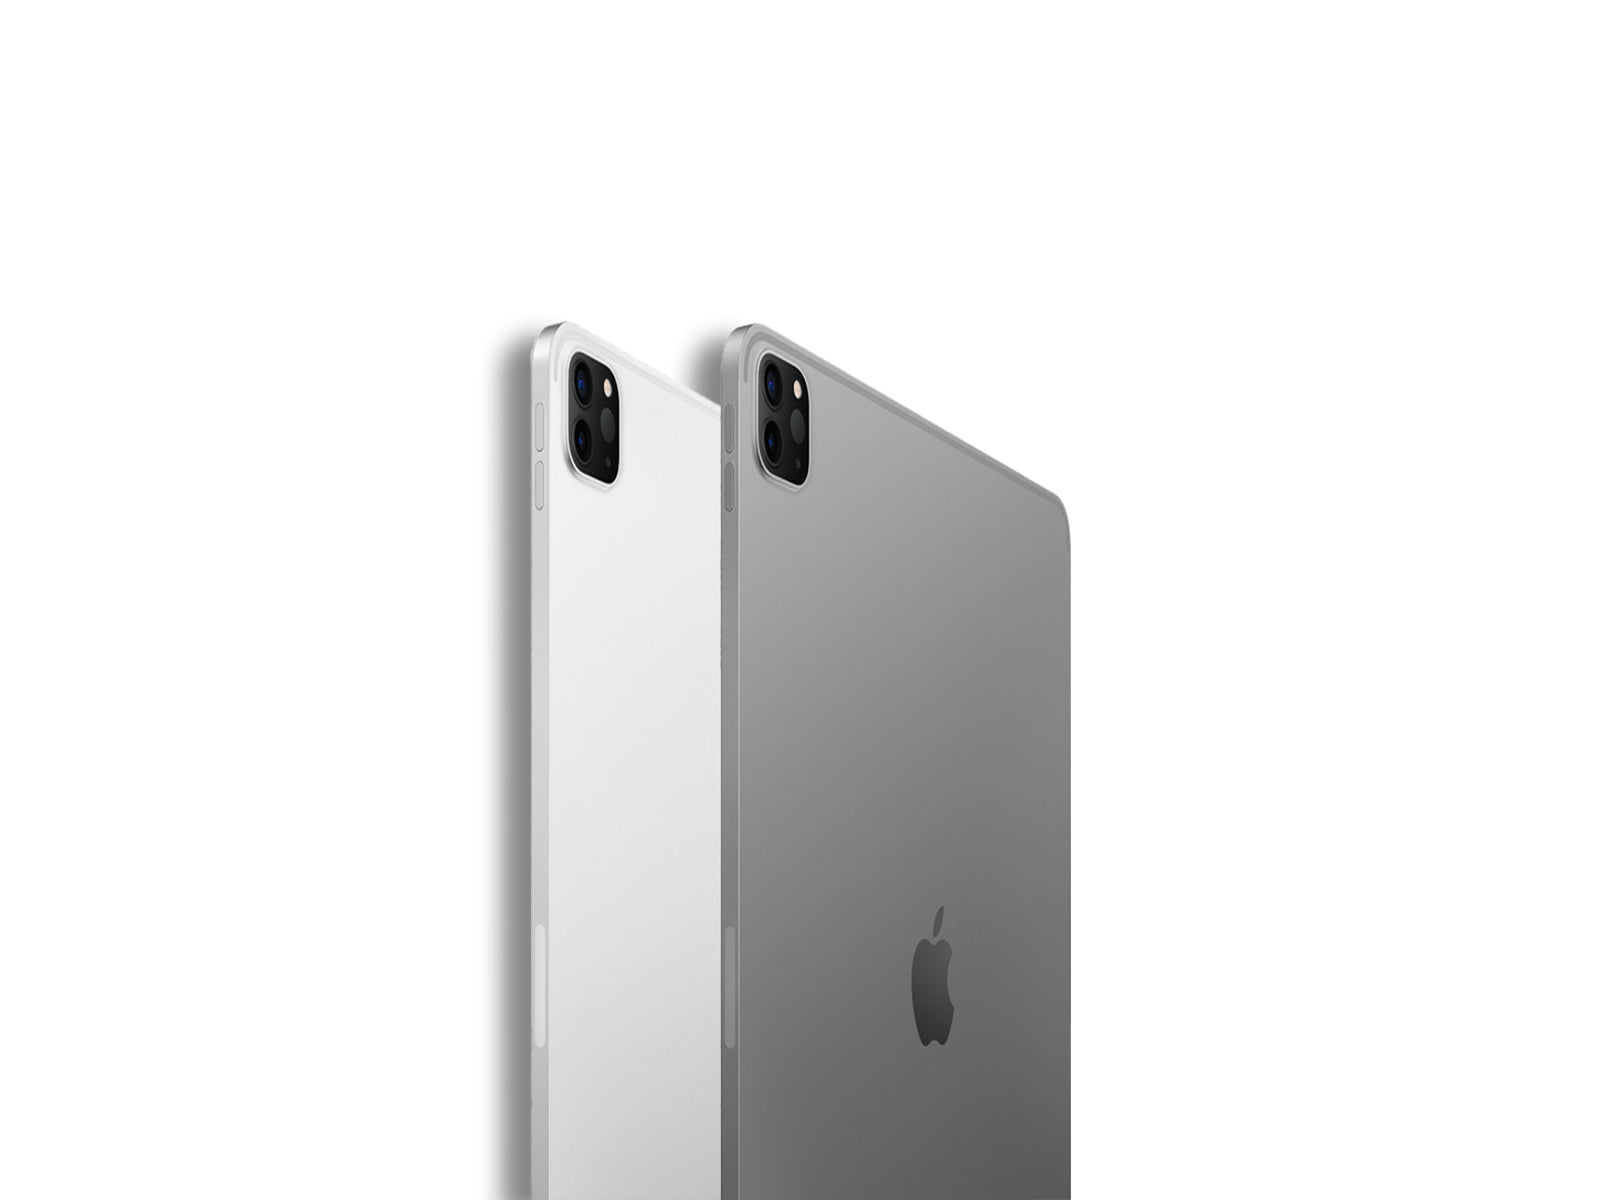 iPad Pro 4th Gen In Space Grey And Silver